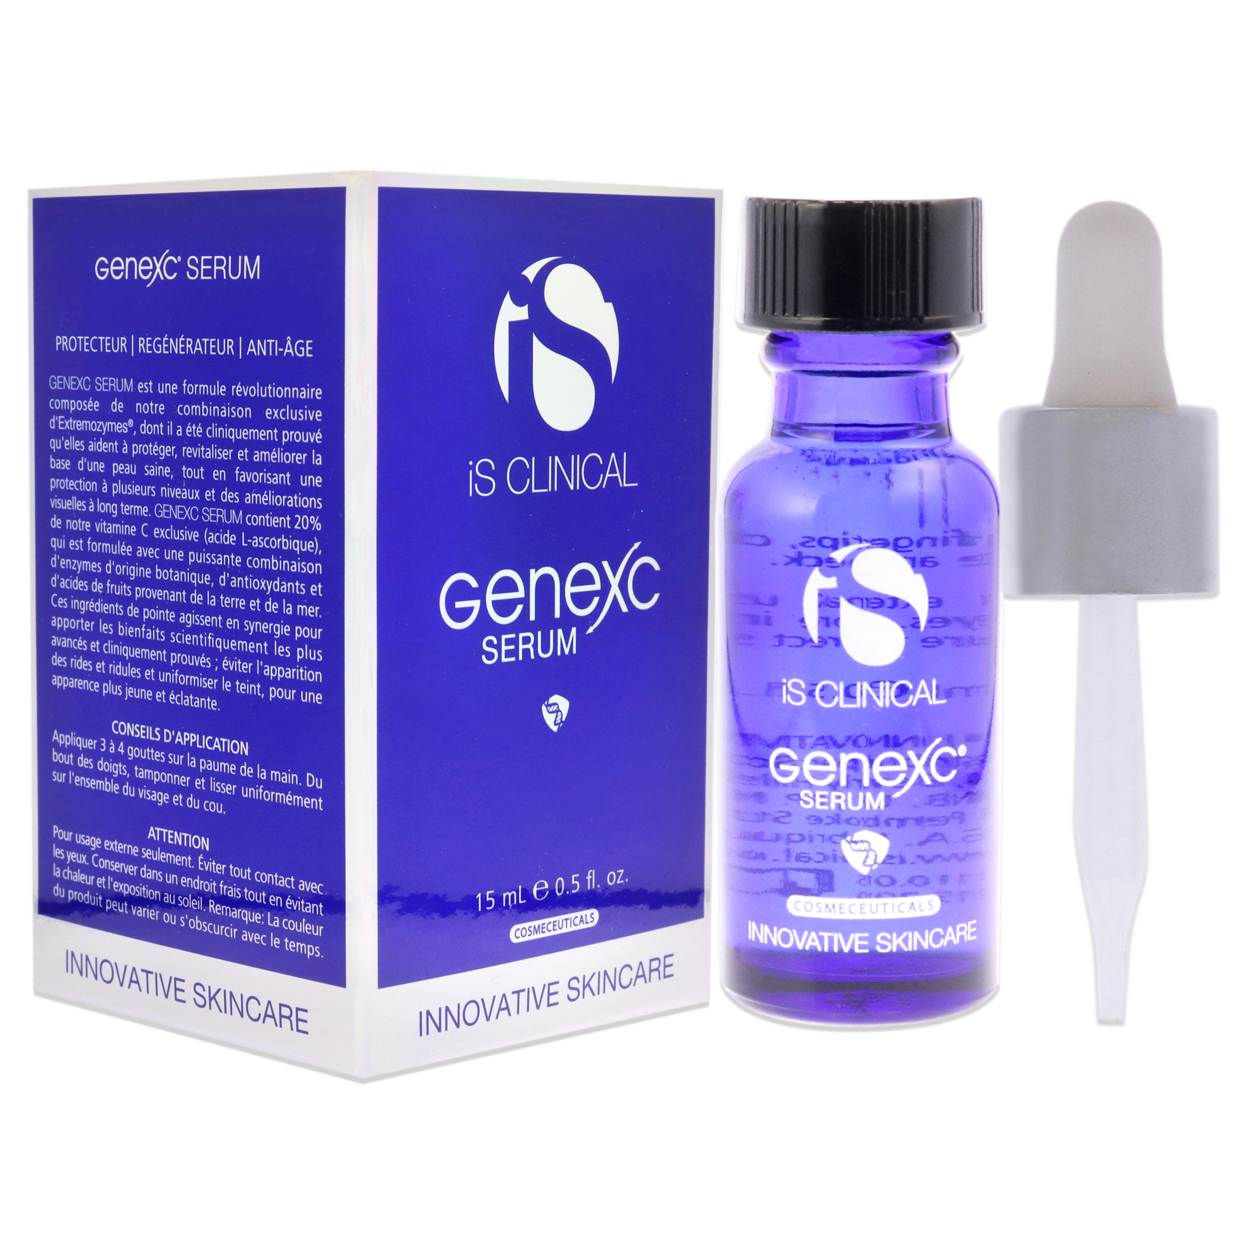 iS Clinical GeneXC Serum by iS Clinical for   - 0.5 oz Serum